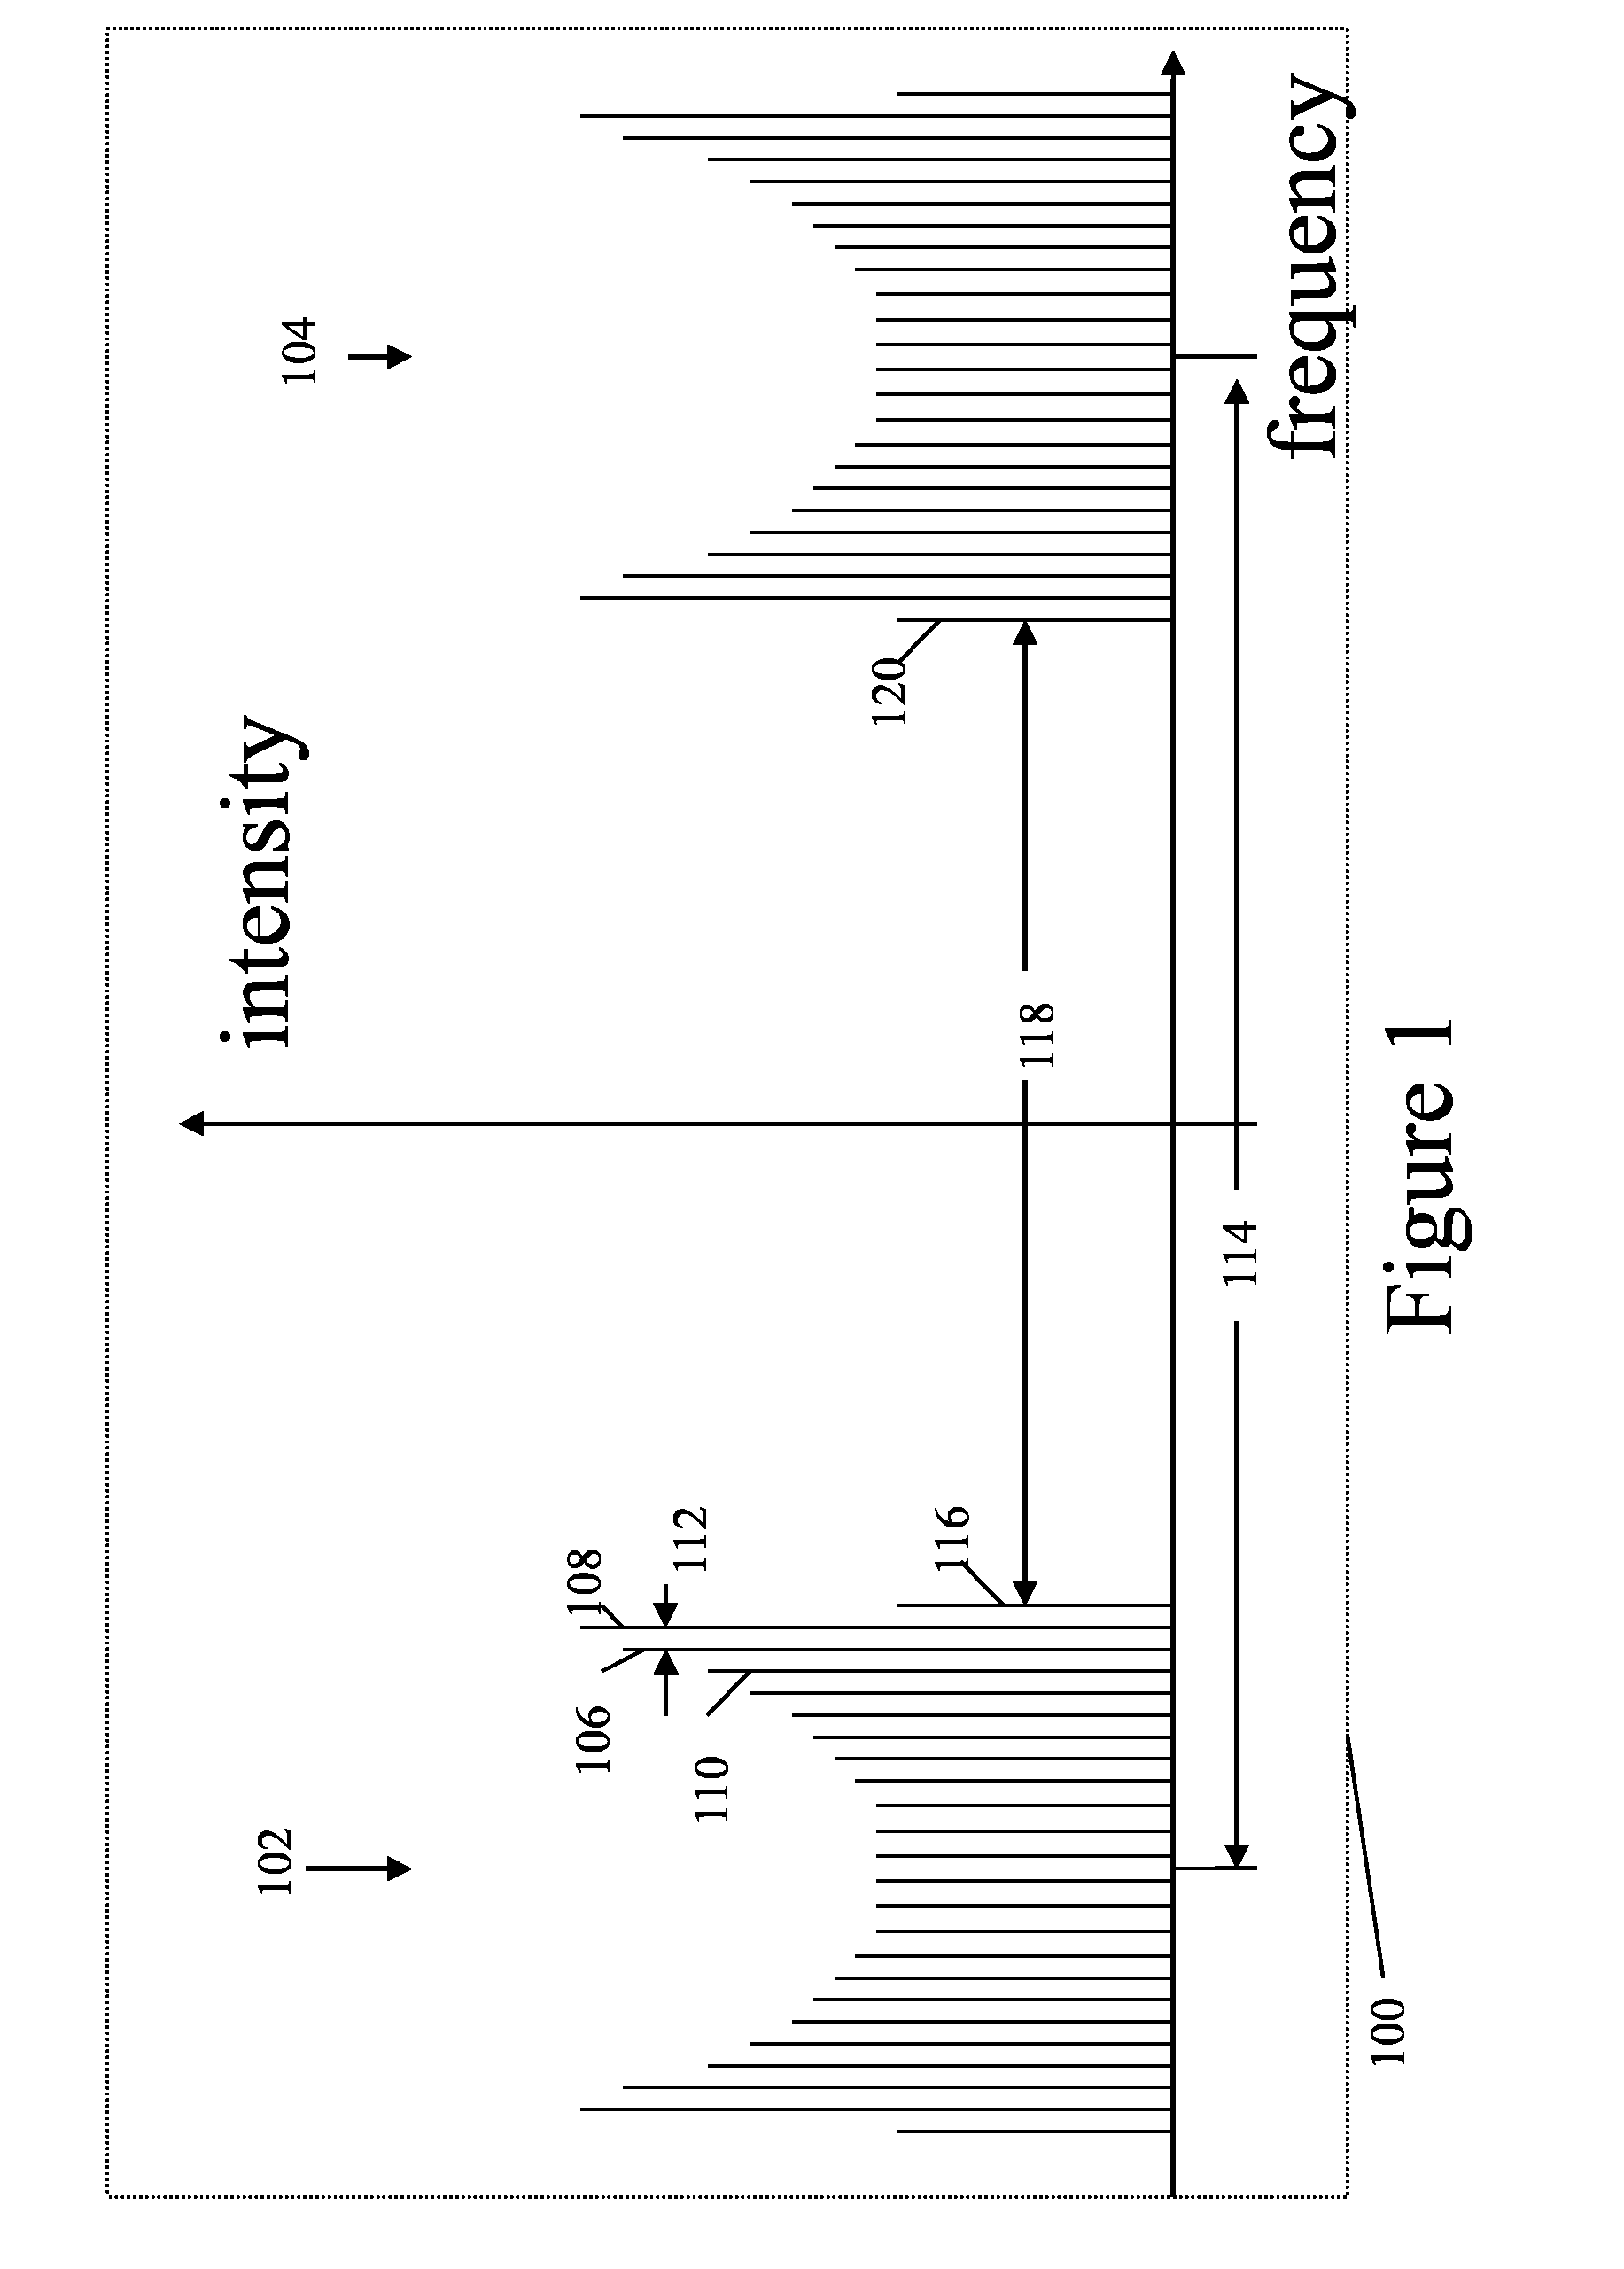 Instantaneous, phase measuring interferometer apparatus and method